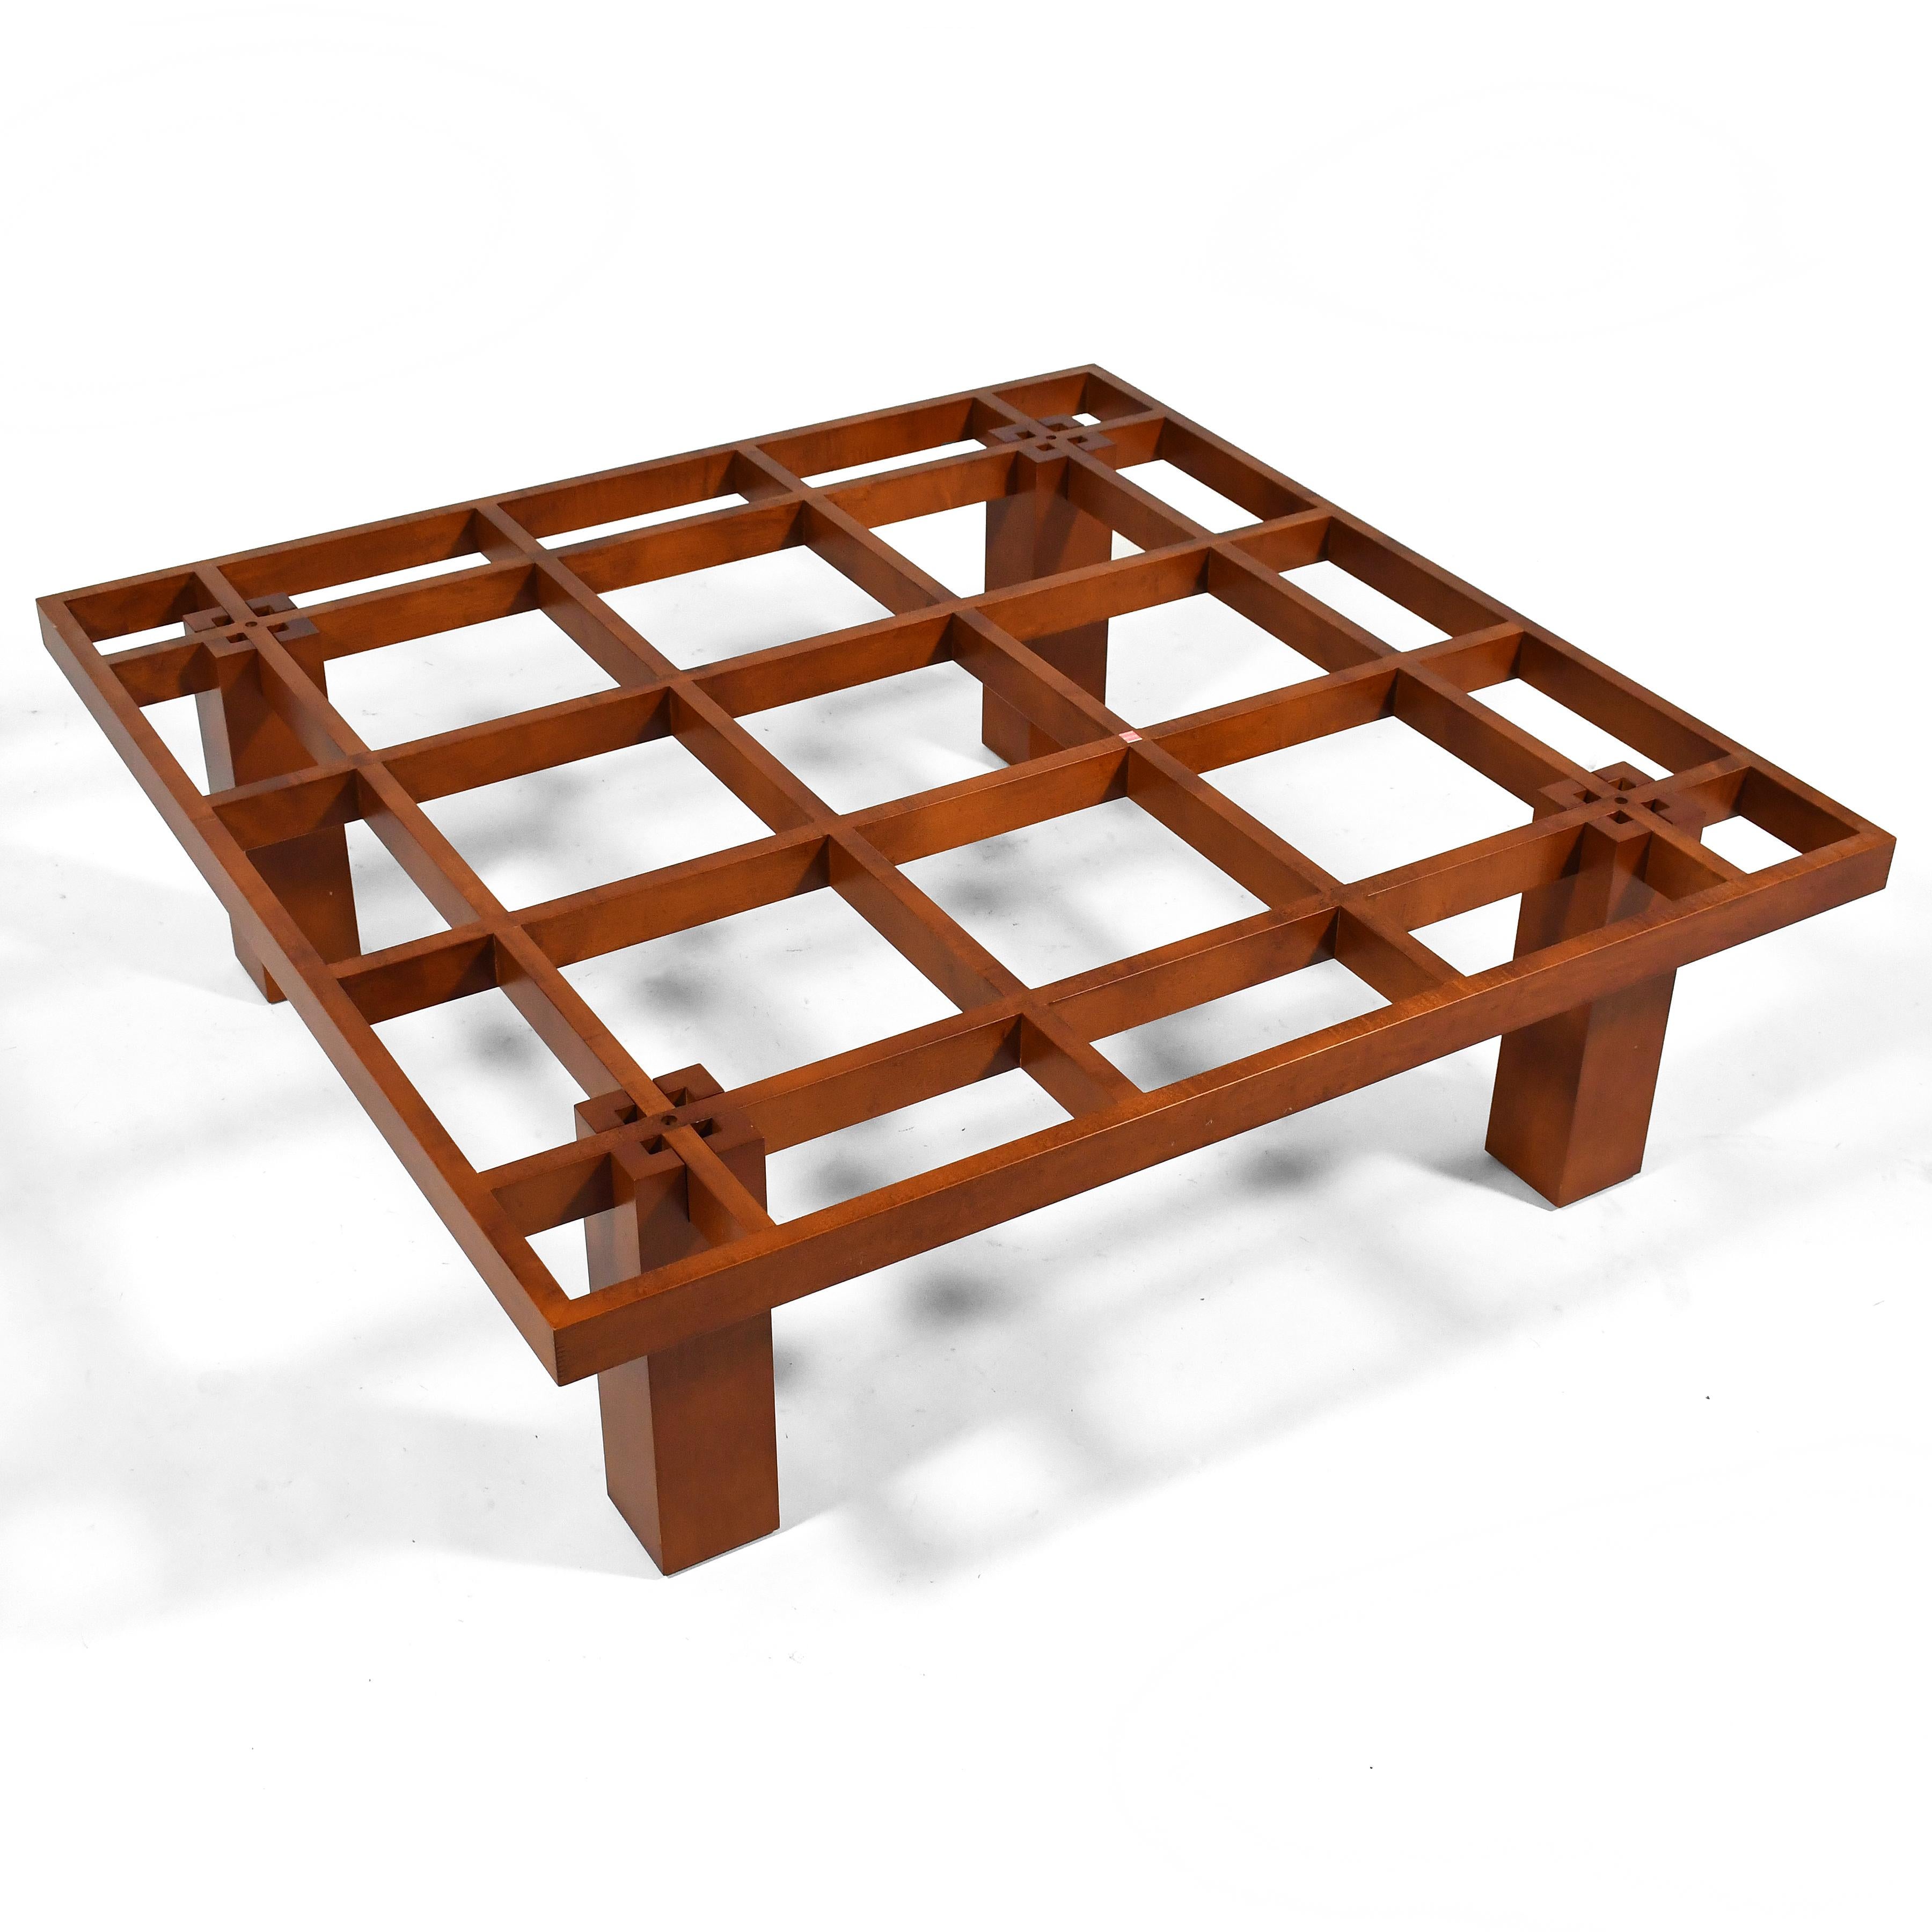 This handsome design by Conde House has a beautiful architectural quality. Crafted of cherry wood,  its grid-like top is supported by demountable legs. The original top was frosted glass, but it was damaged so it needs a replacement. We think it